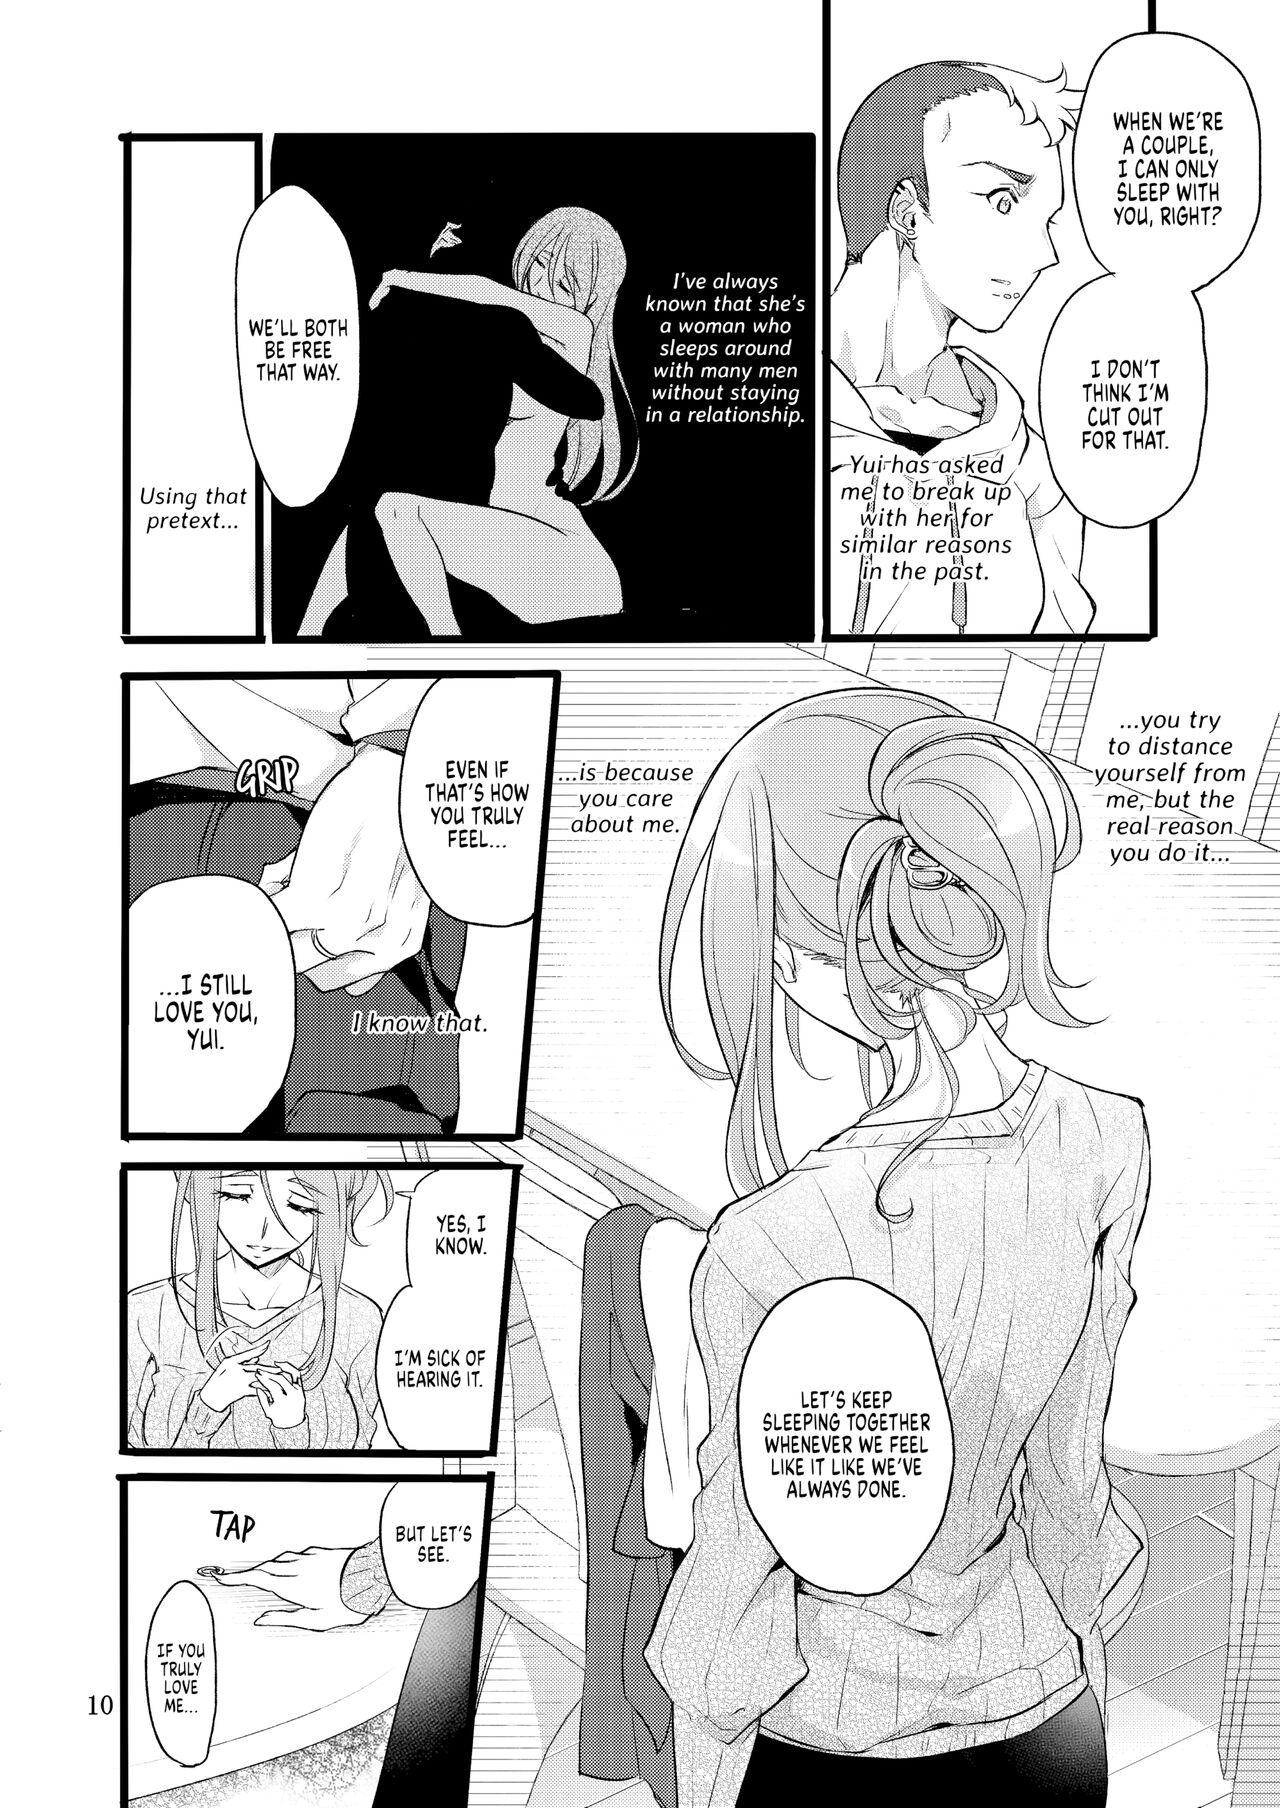 Whooty Youre not the One at Fault - Original Jacking - Page 9